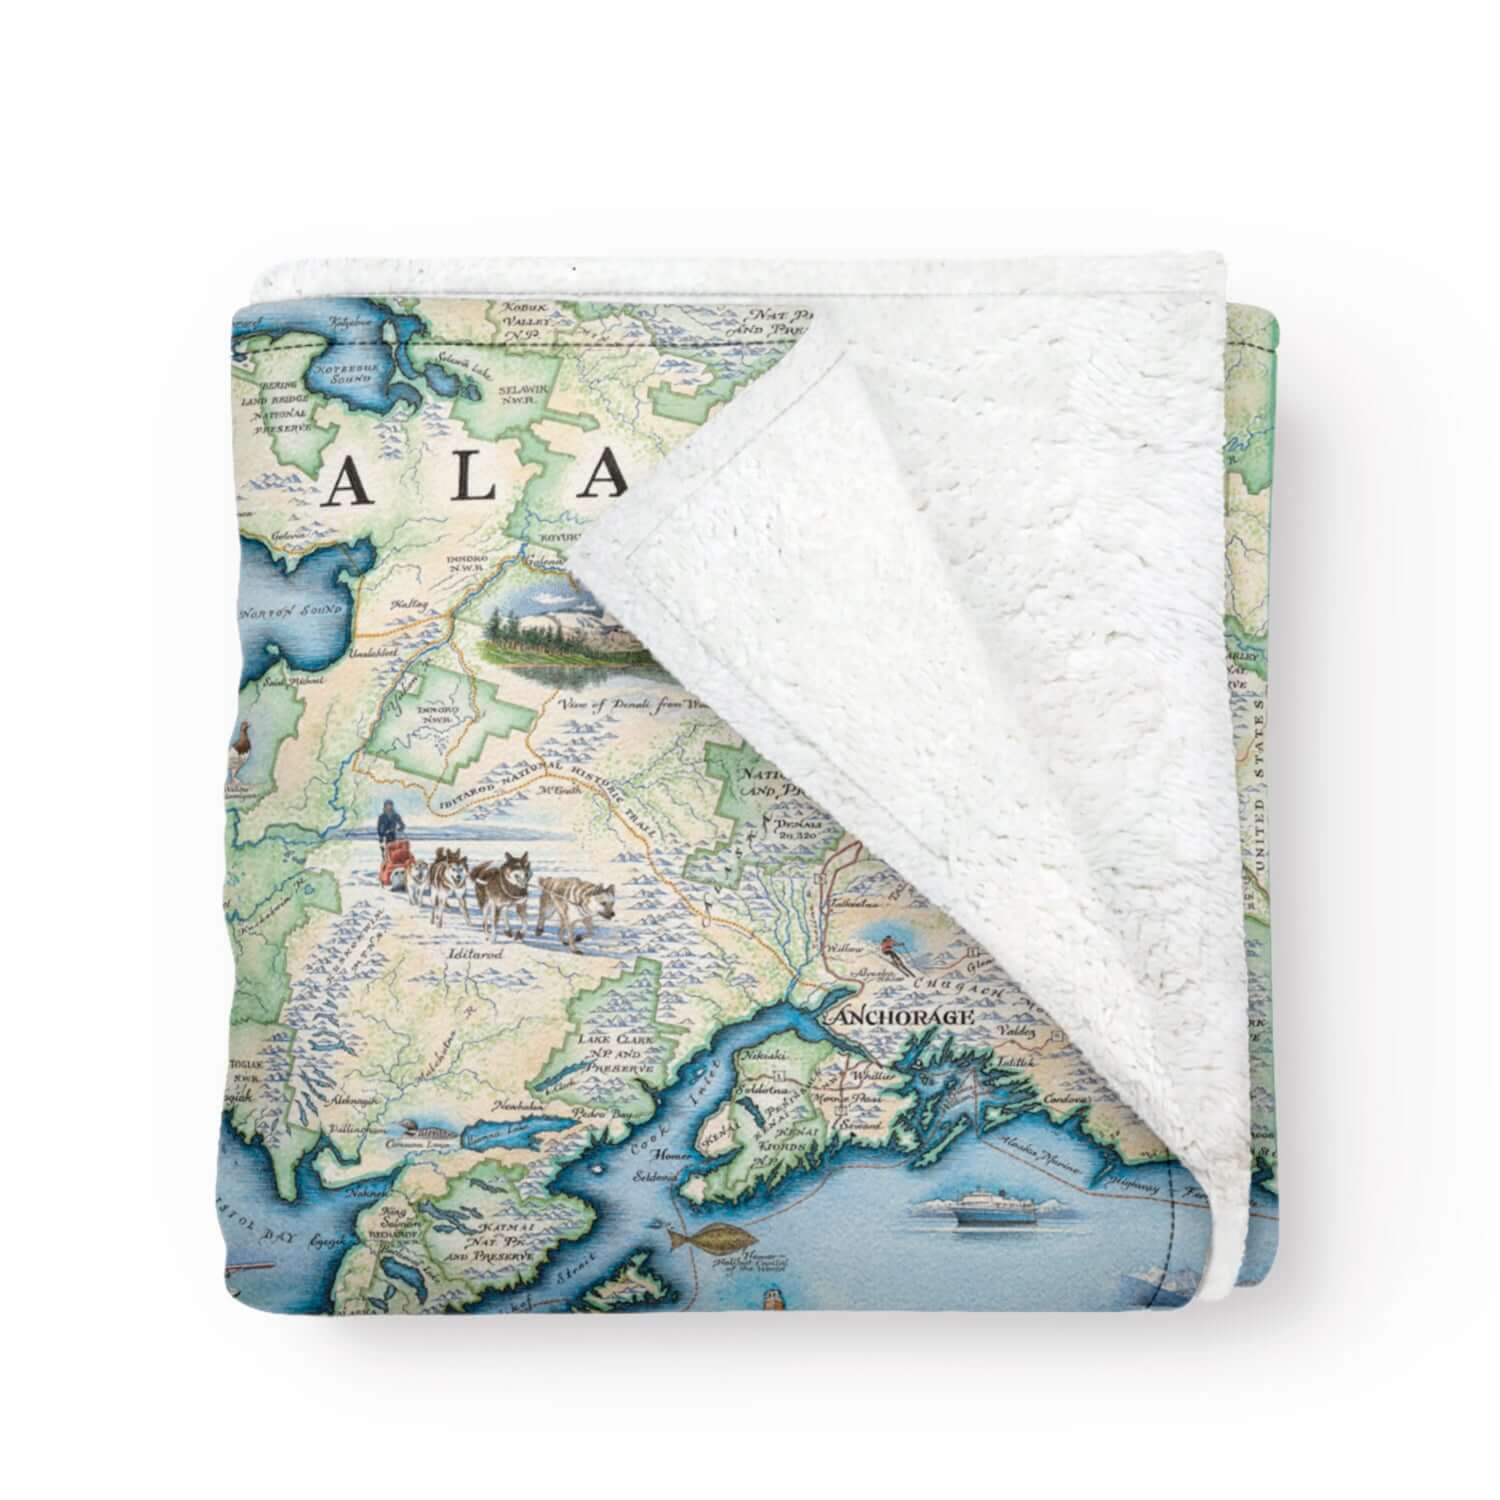 Alaska State map fleece blanket in earth-tone colors.  The map includes Denali National Park and cities such as Anchorage, Fairbanks, and Juneau. Illustrations of wildlife matching the region: Polar bears, arctic foxes, moose, caribou, Gray wolves, Dall Sheep, wolverines, Canadian Lynx, King Salmon, Halibut, King Crab, horned puffins, harbor seals, Arctic Tern, ptarmigan, walruses, Kodiak bears, musk ox, Bald Eagles, Mountain Goats and more. 